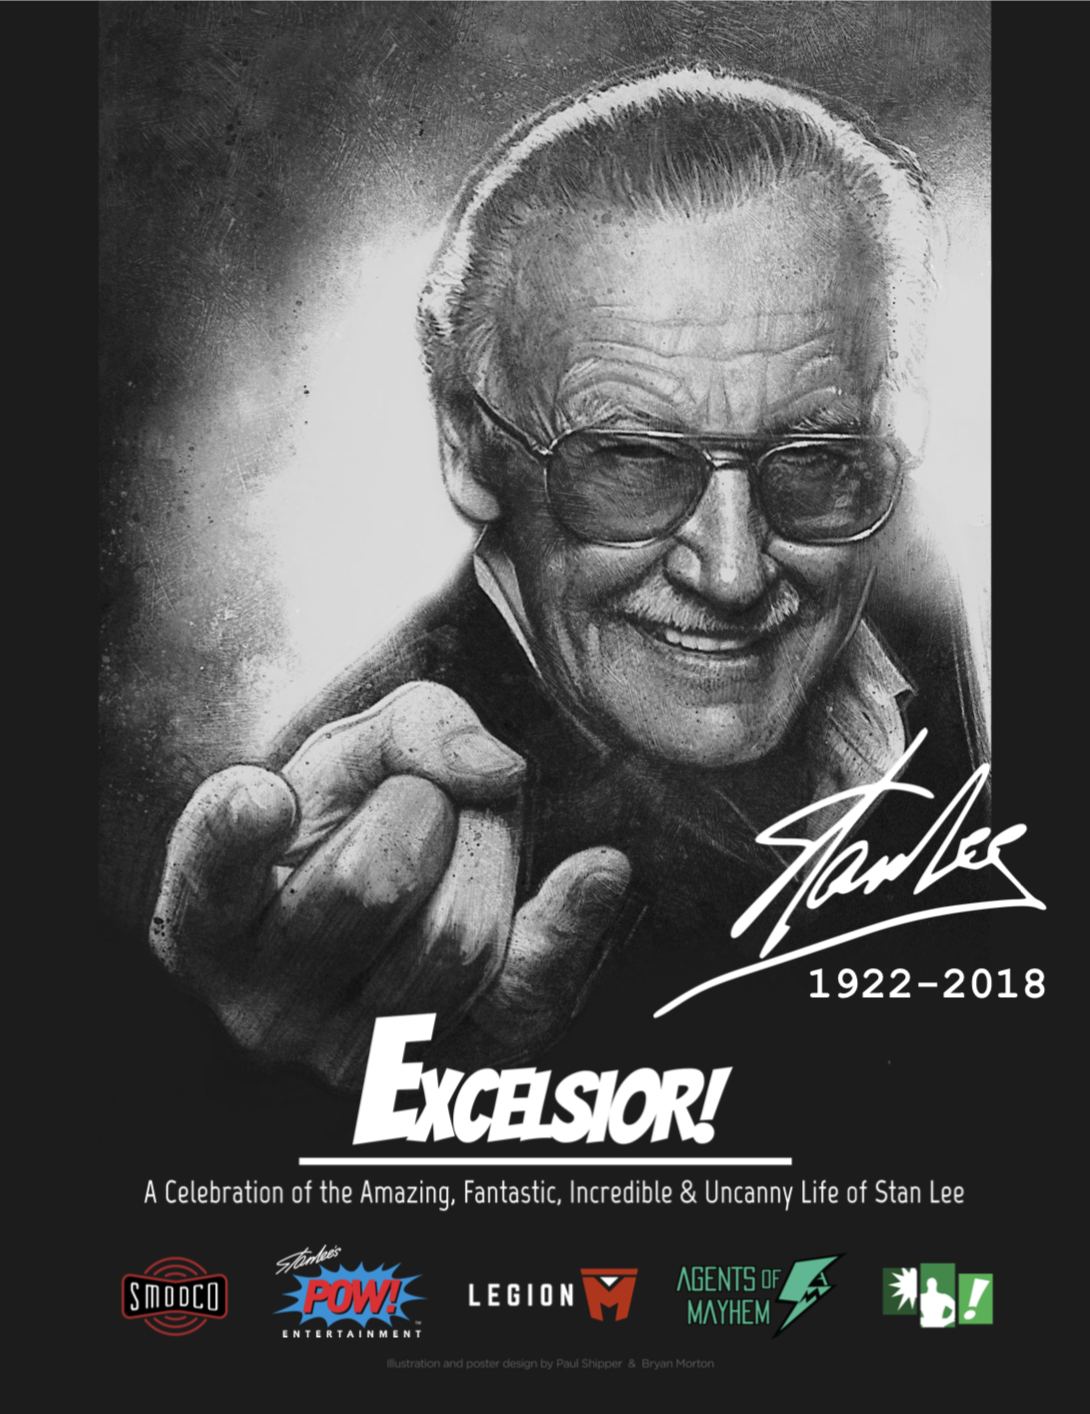 Kevin Smith & Friends Present: “Excelsior! A Celebration of the Amazing, Fantastic, Incredible & Uncanny Life of Stan Lee” Benefiting The Hero Initiative Charity